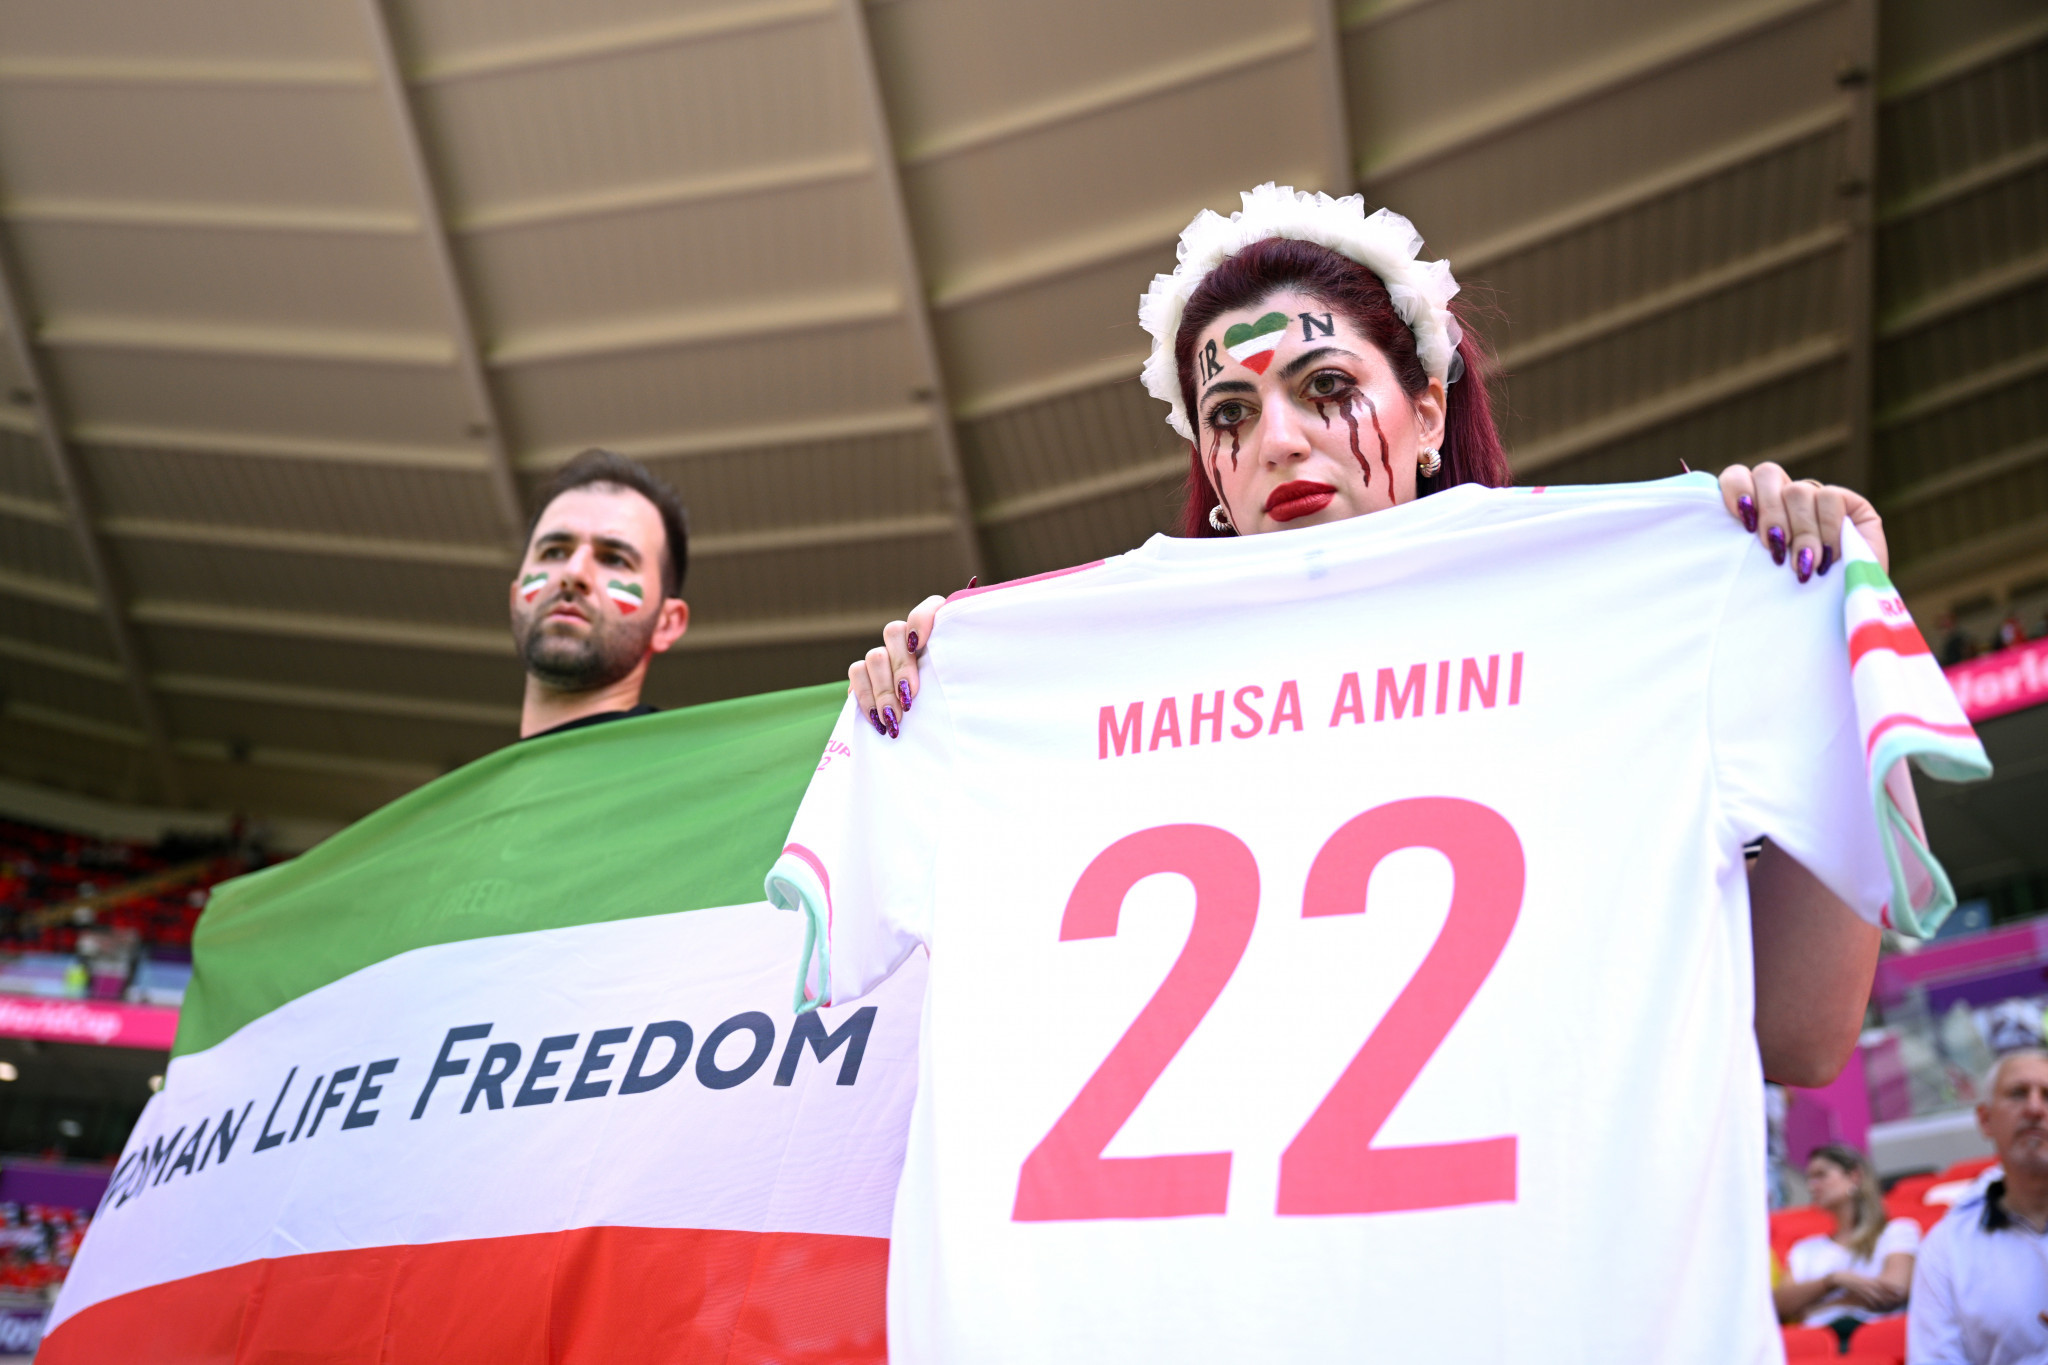 Iran's participation at the World Cup comes against a backdrop of civil unrest and major protests at home ©Getty Images